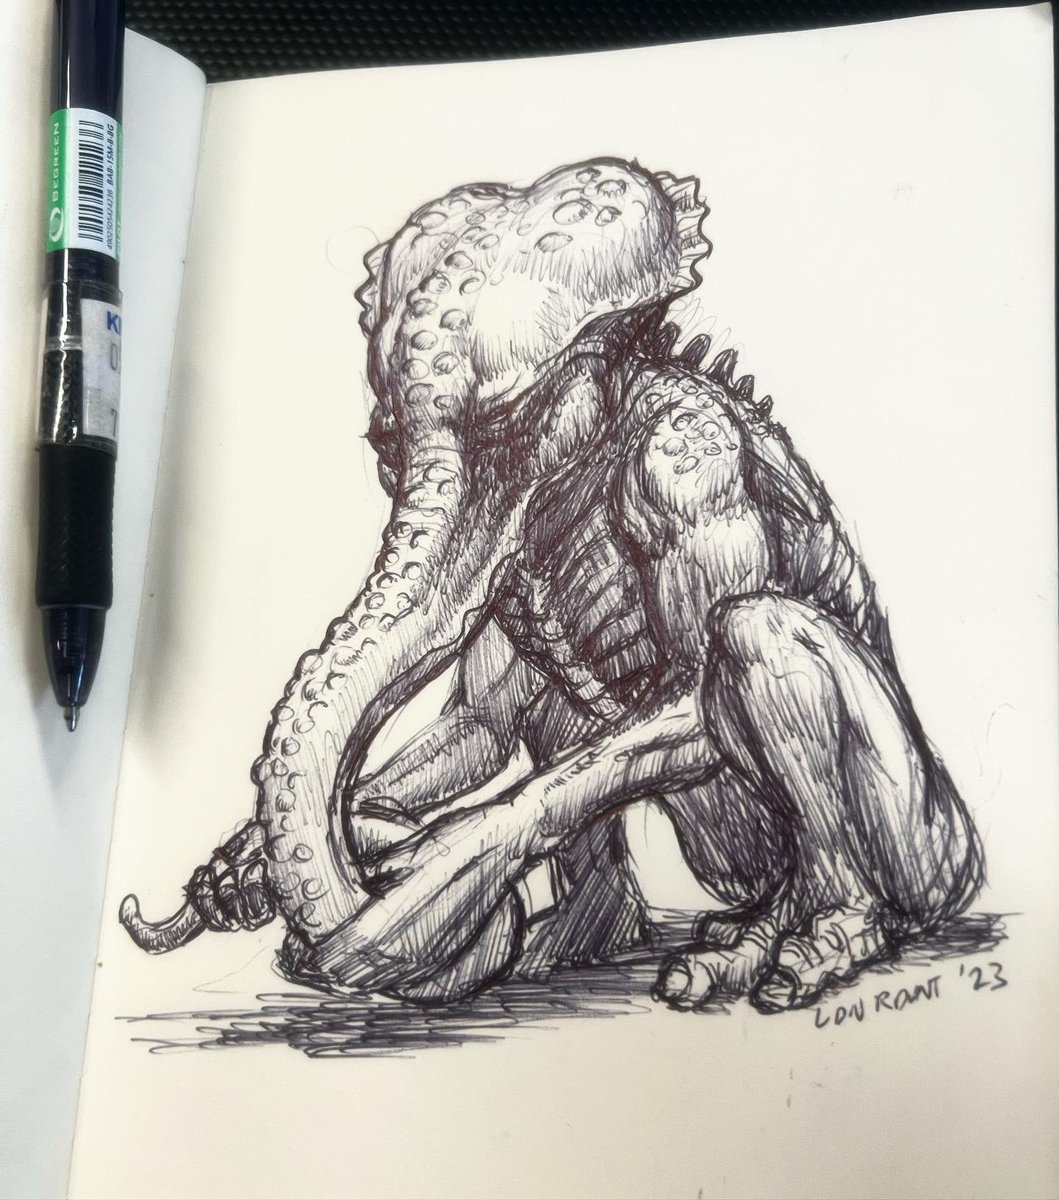 ‘Tentaphant Man’ 
Sketch from Drink & Draw Session last night. Ball point pen and A5 sketch pad.
.
.
#creature #sketch #traditionalart #conceptart #ballpointpenart #penandinkdrawing